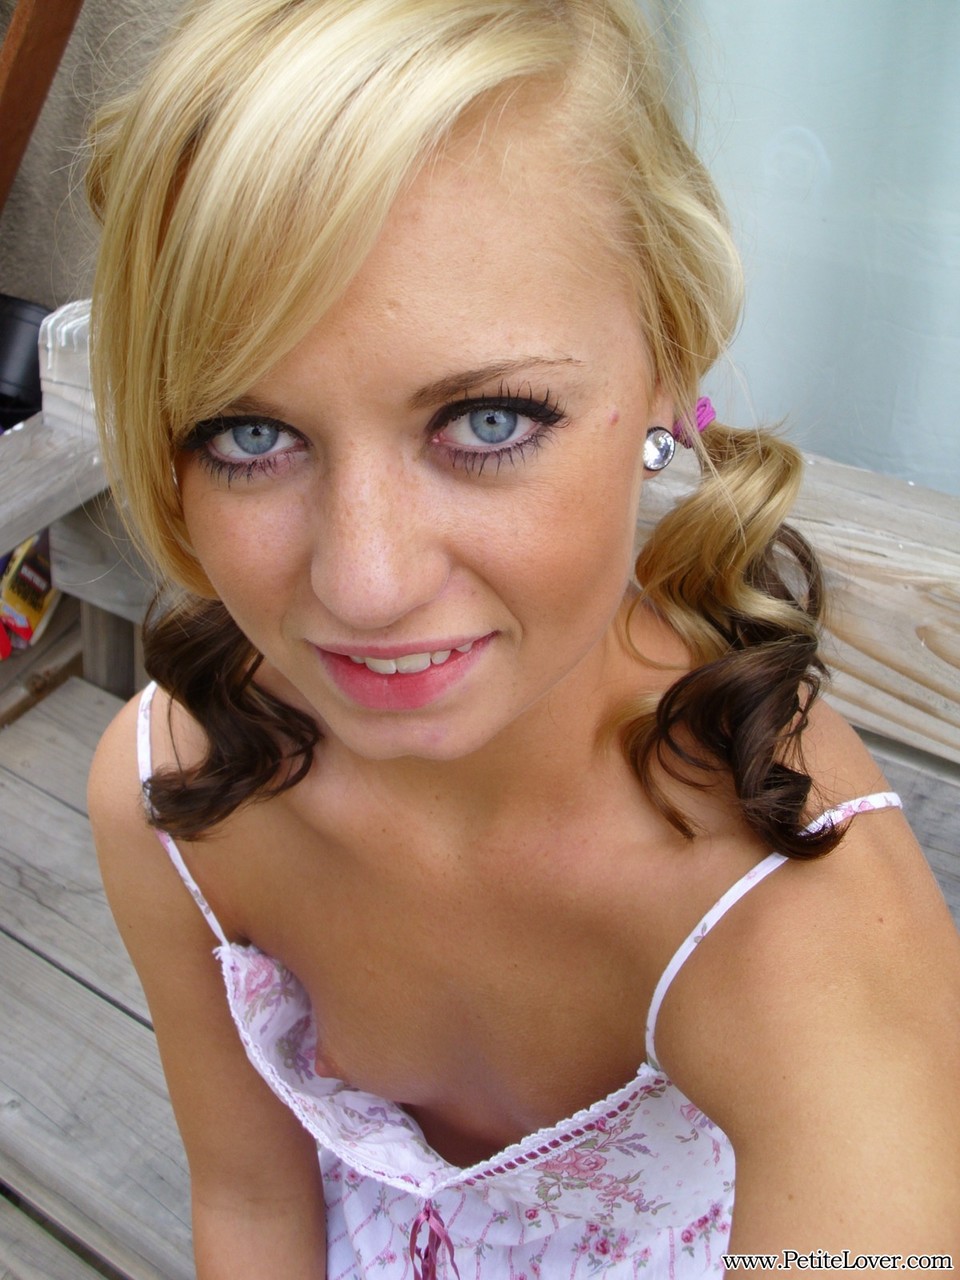 Cute blonde Tiff in pigtails showing off her wee small tits & tiny bald pussy porn photo #428478636 | Petite Lover Pics, Tiff, Amateur, mobile porn